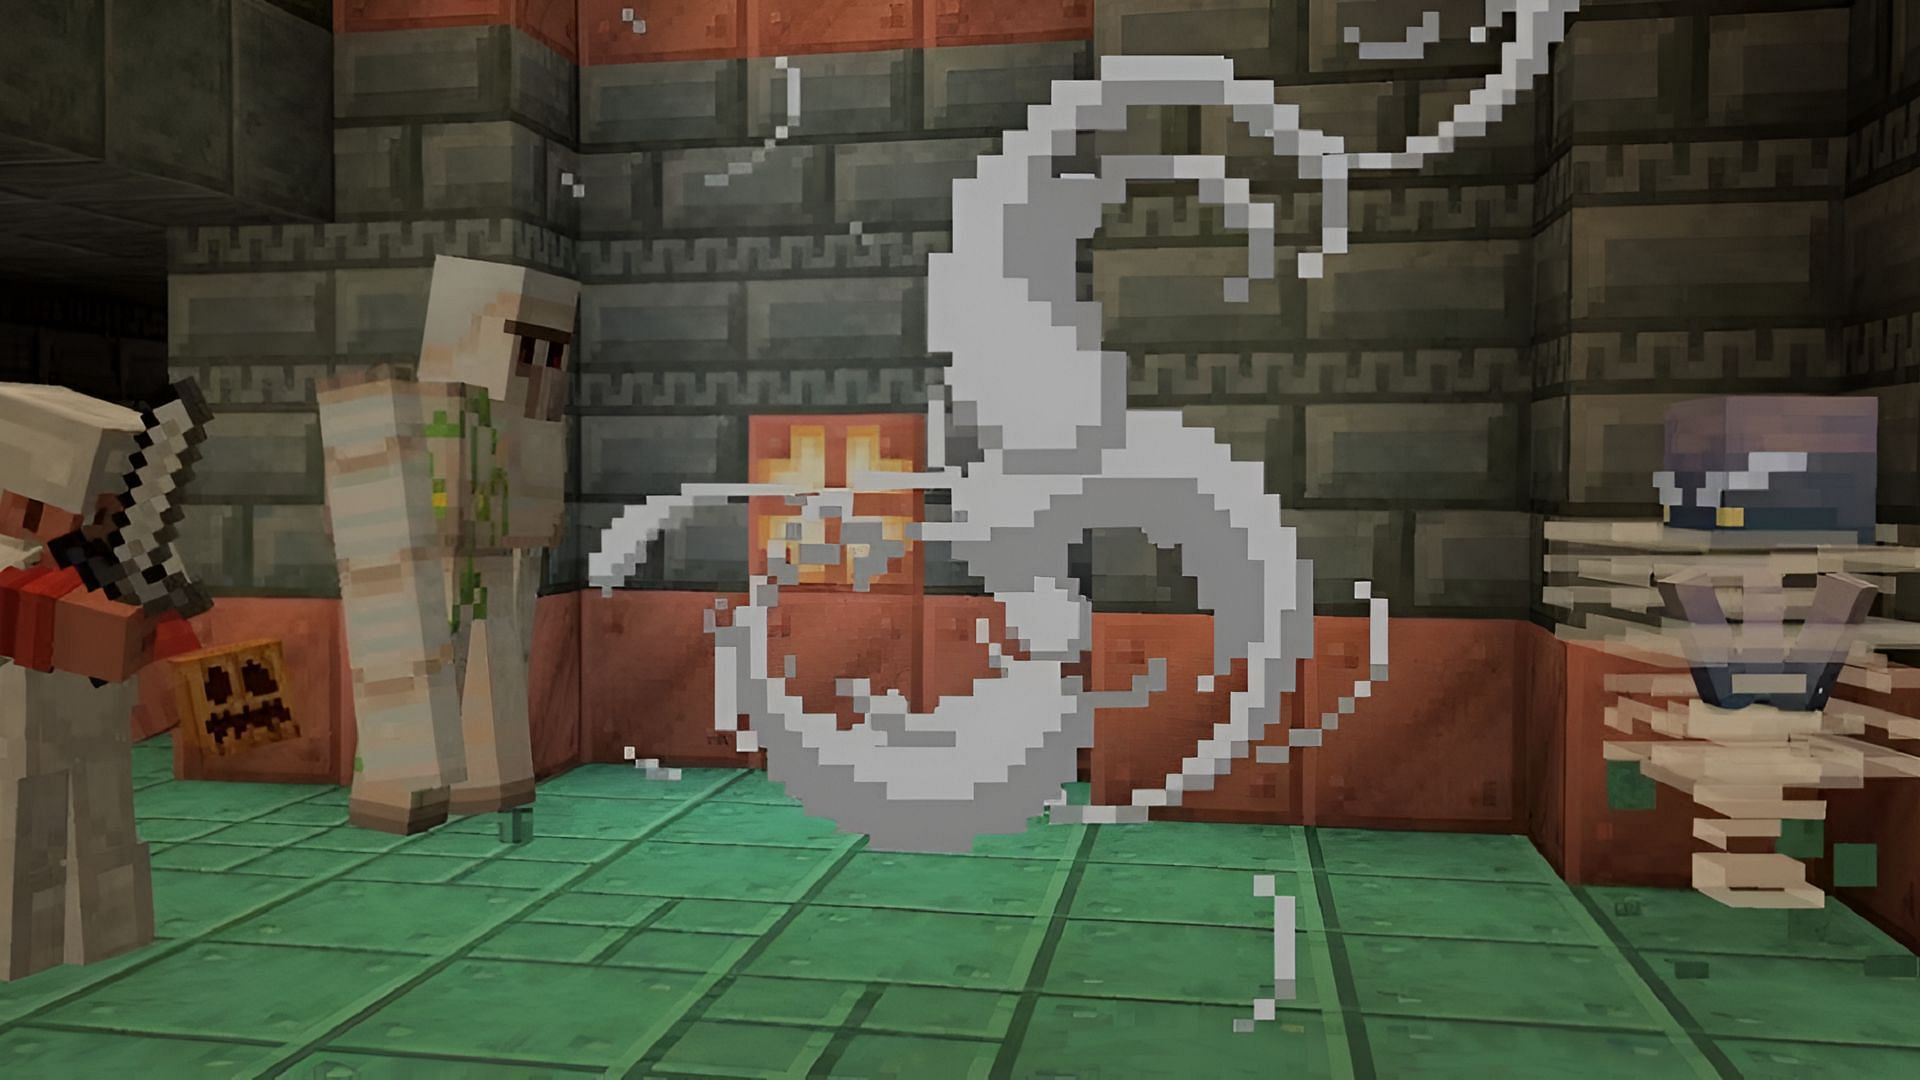 A player and an iron golem face a breeze in Minecraft Snapshot 24w04a.